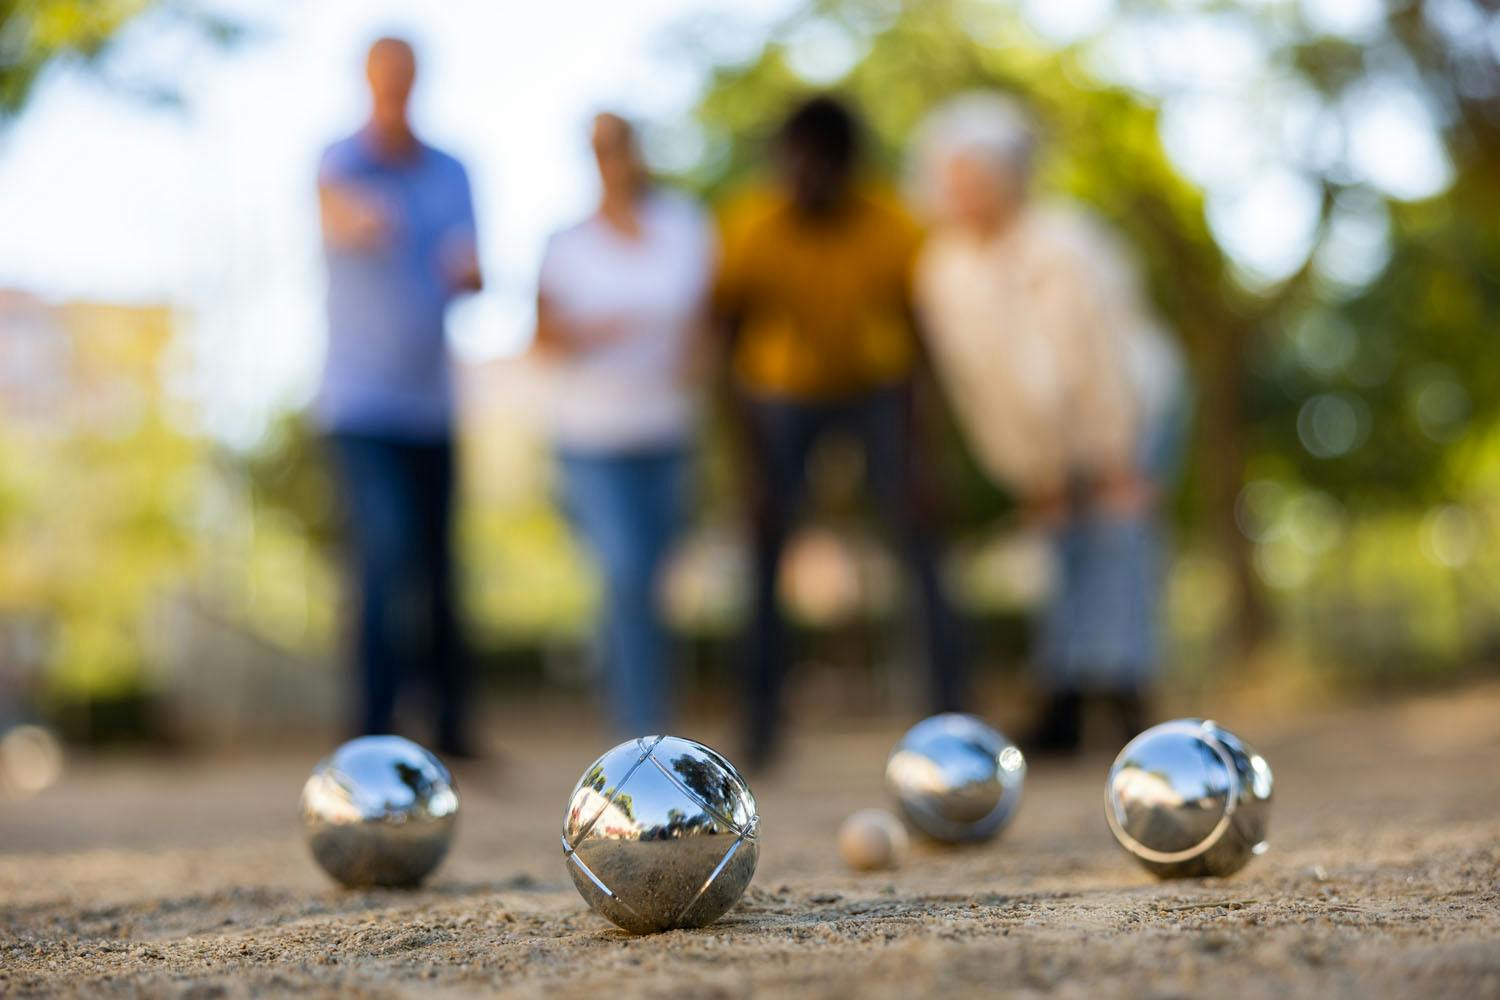 petanque - popular sport in southern france